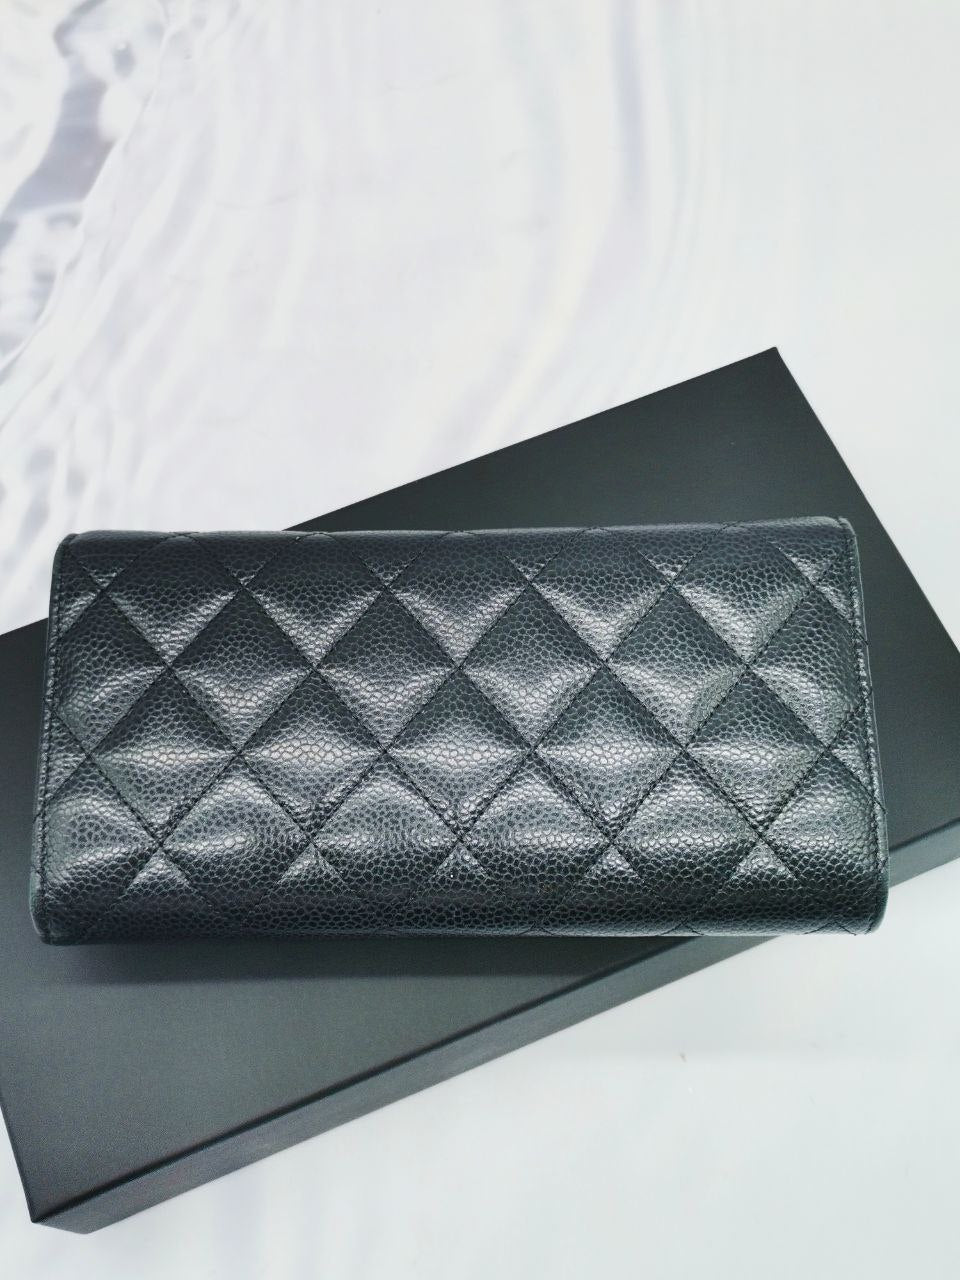 Chanel Caviar Leather Long Wallet  -full Set-